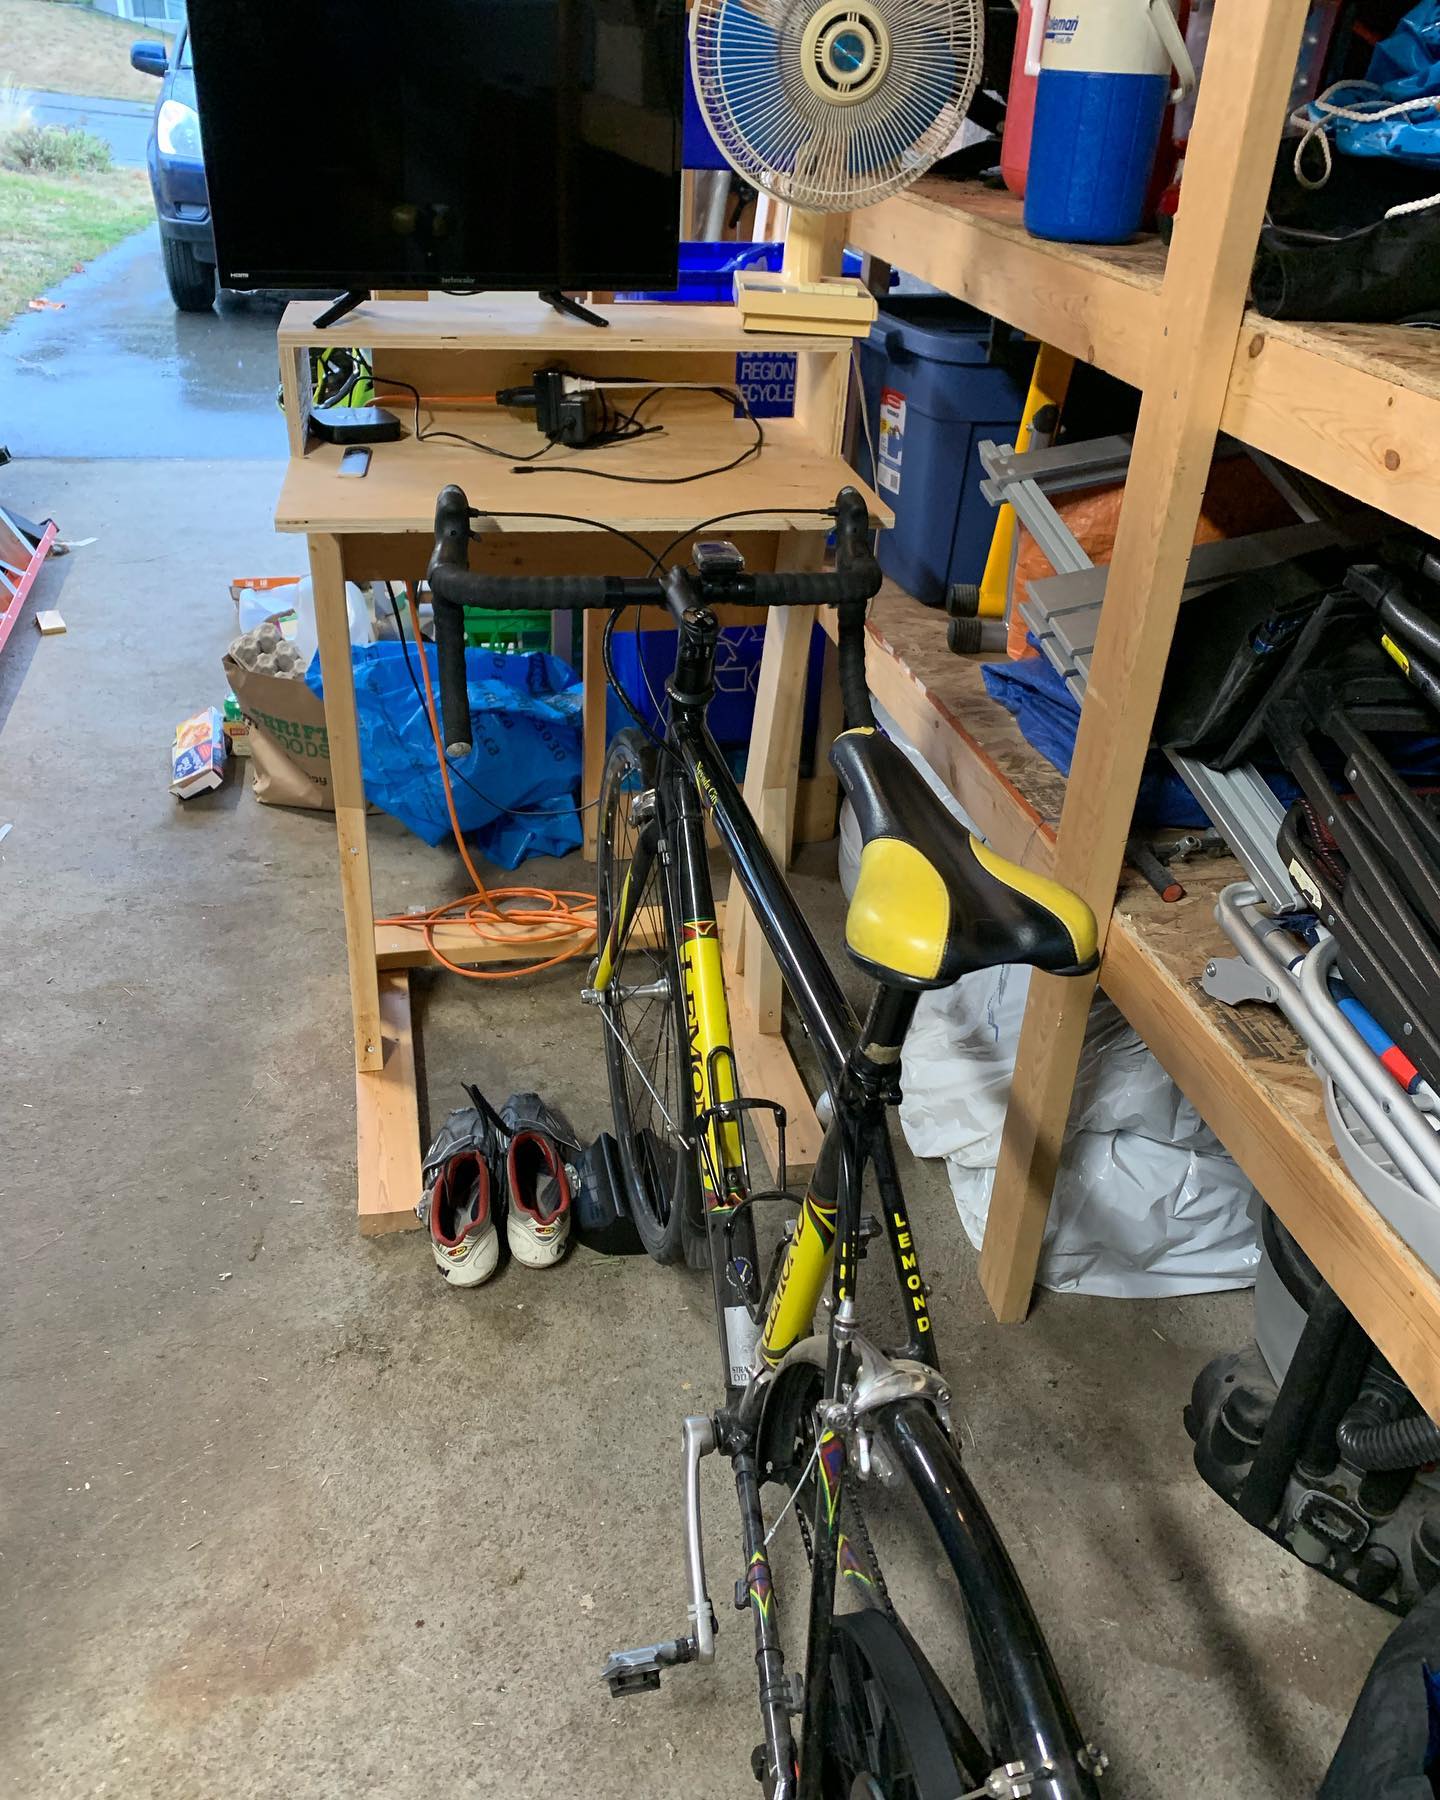 Today seems like a good day to setup the @zwift rig and ride indoors. Atmospheric river is running today and it is wet, wet, wet outside. . #cycling #yyj #bikesarefun #paincave